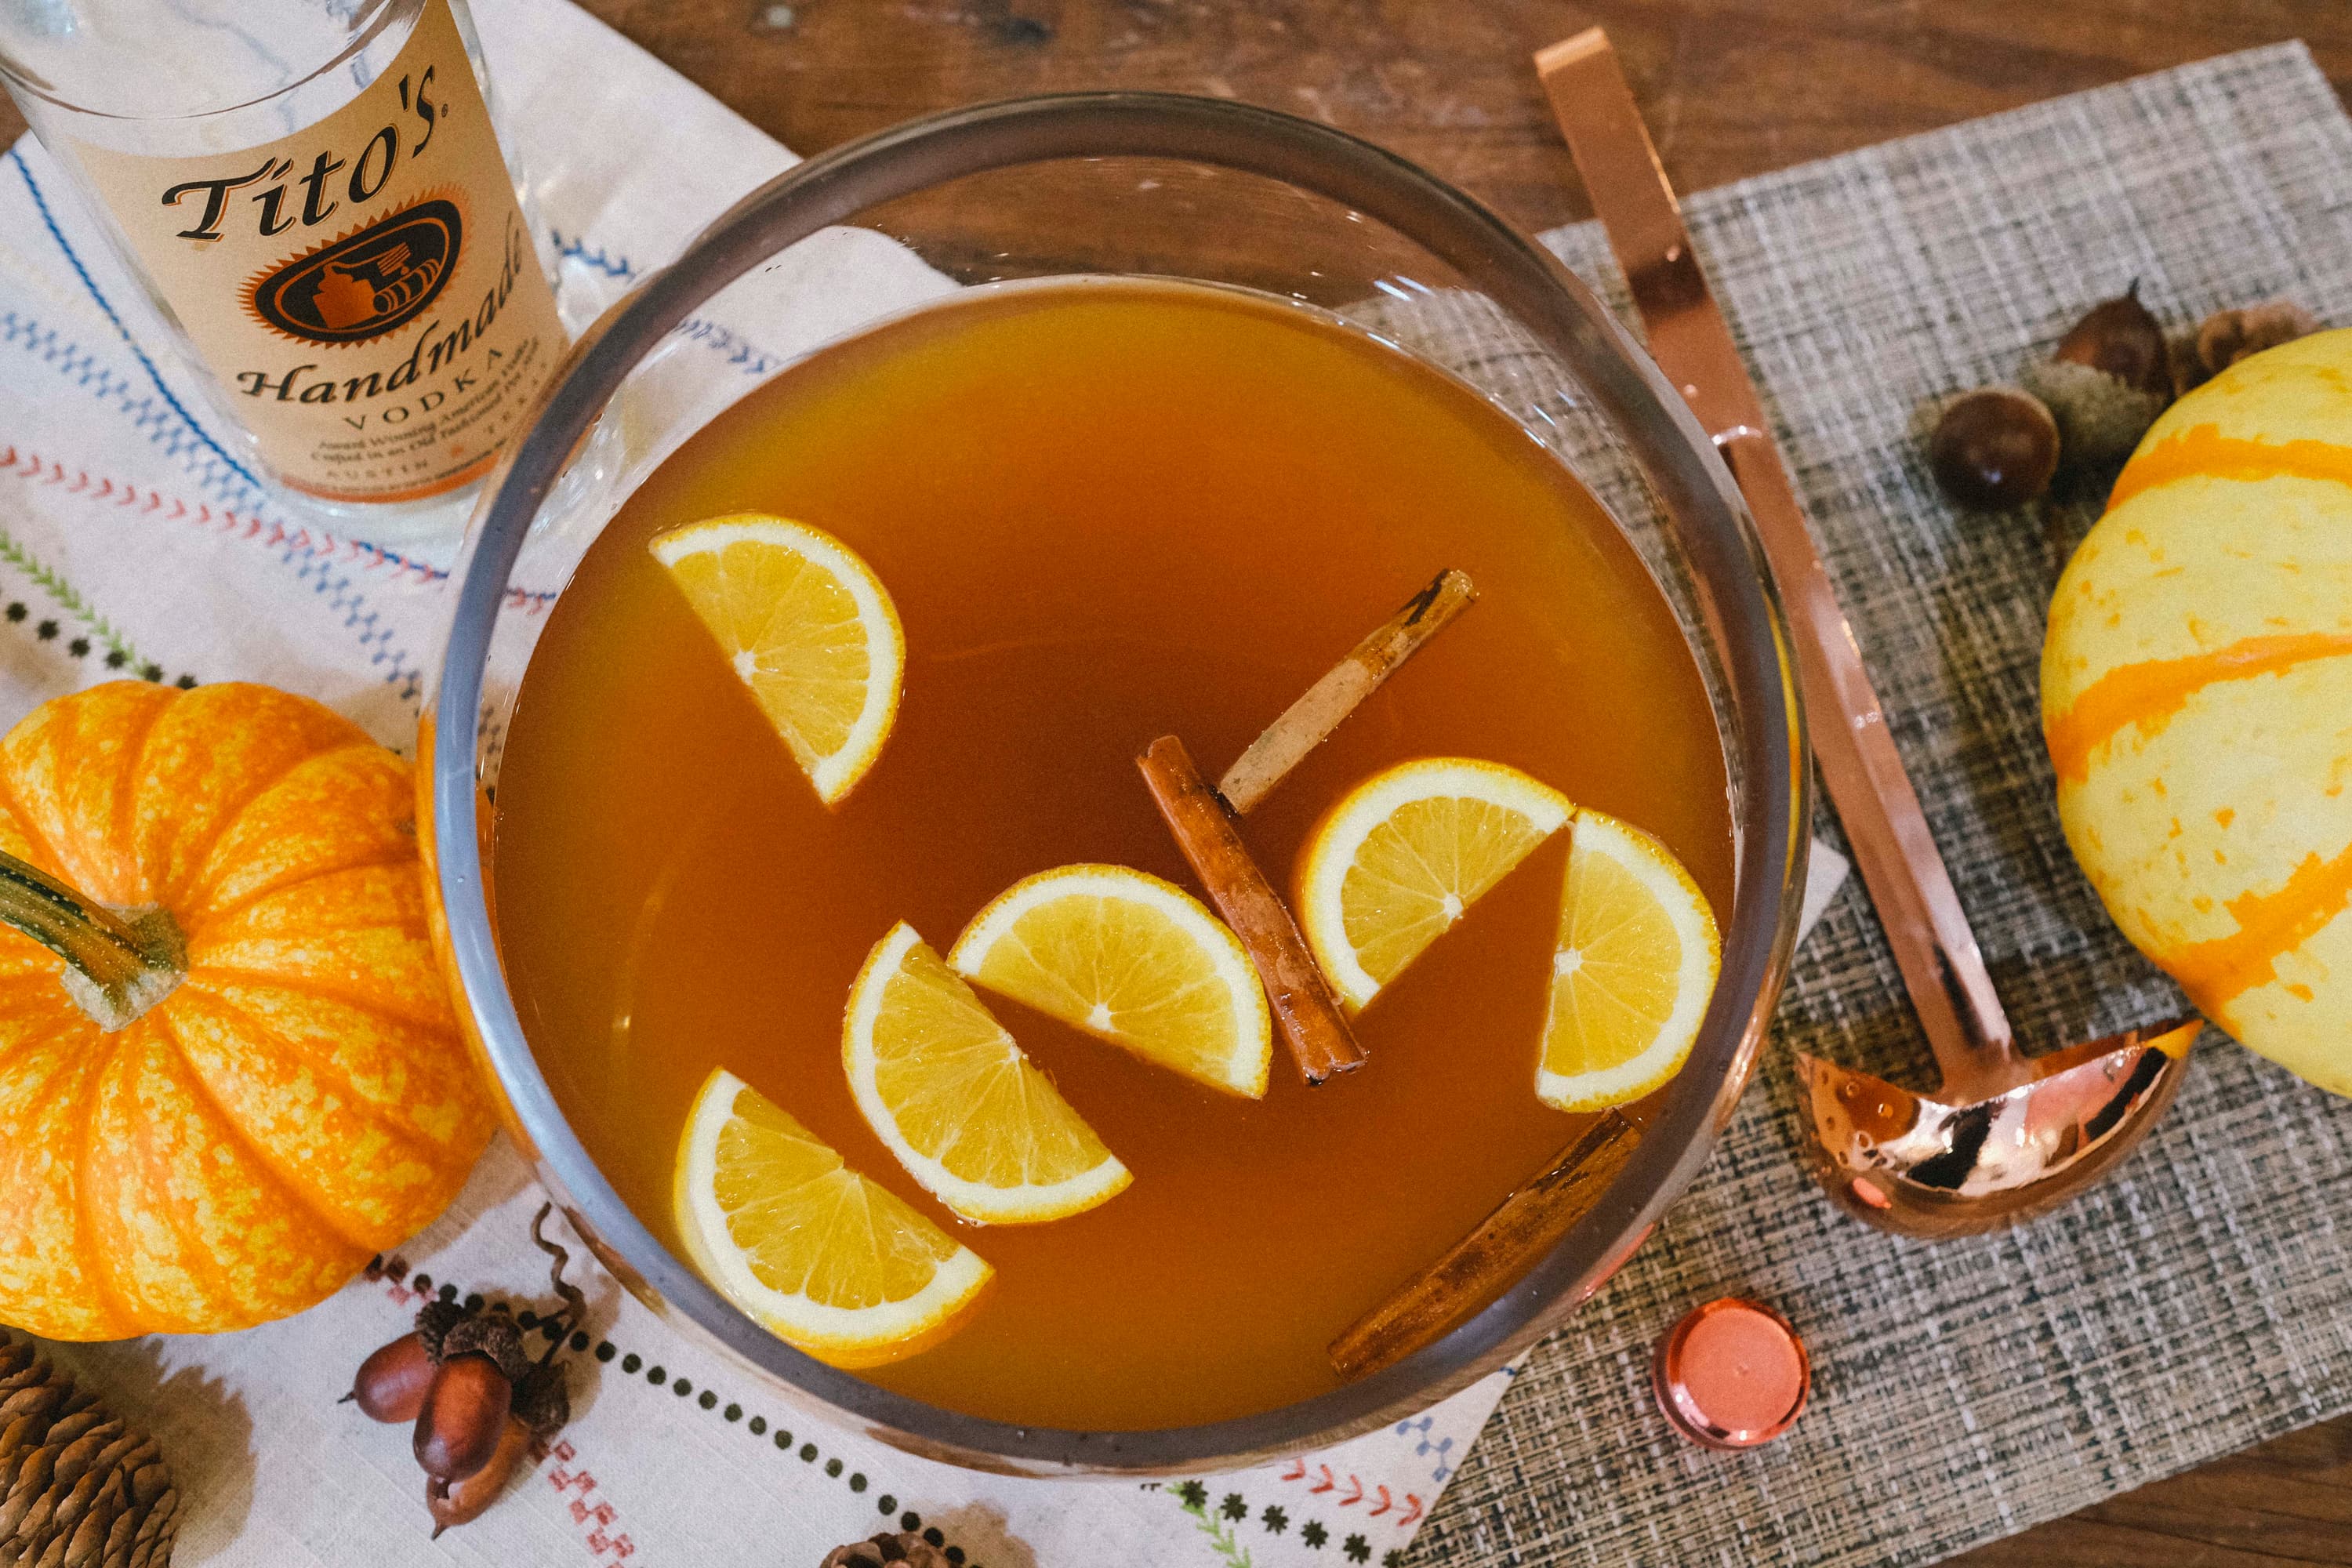 Tito's Vodka Harvest Punch cocktail with oranges and cinnamon